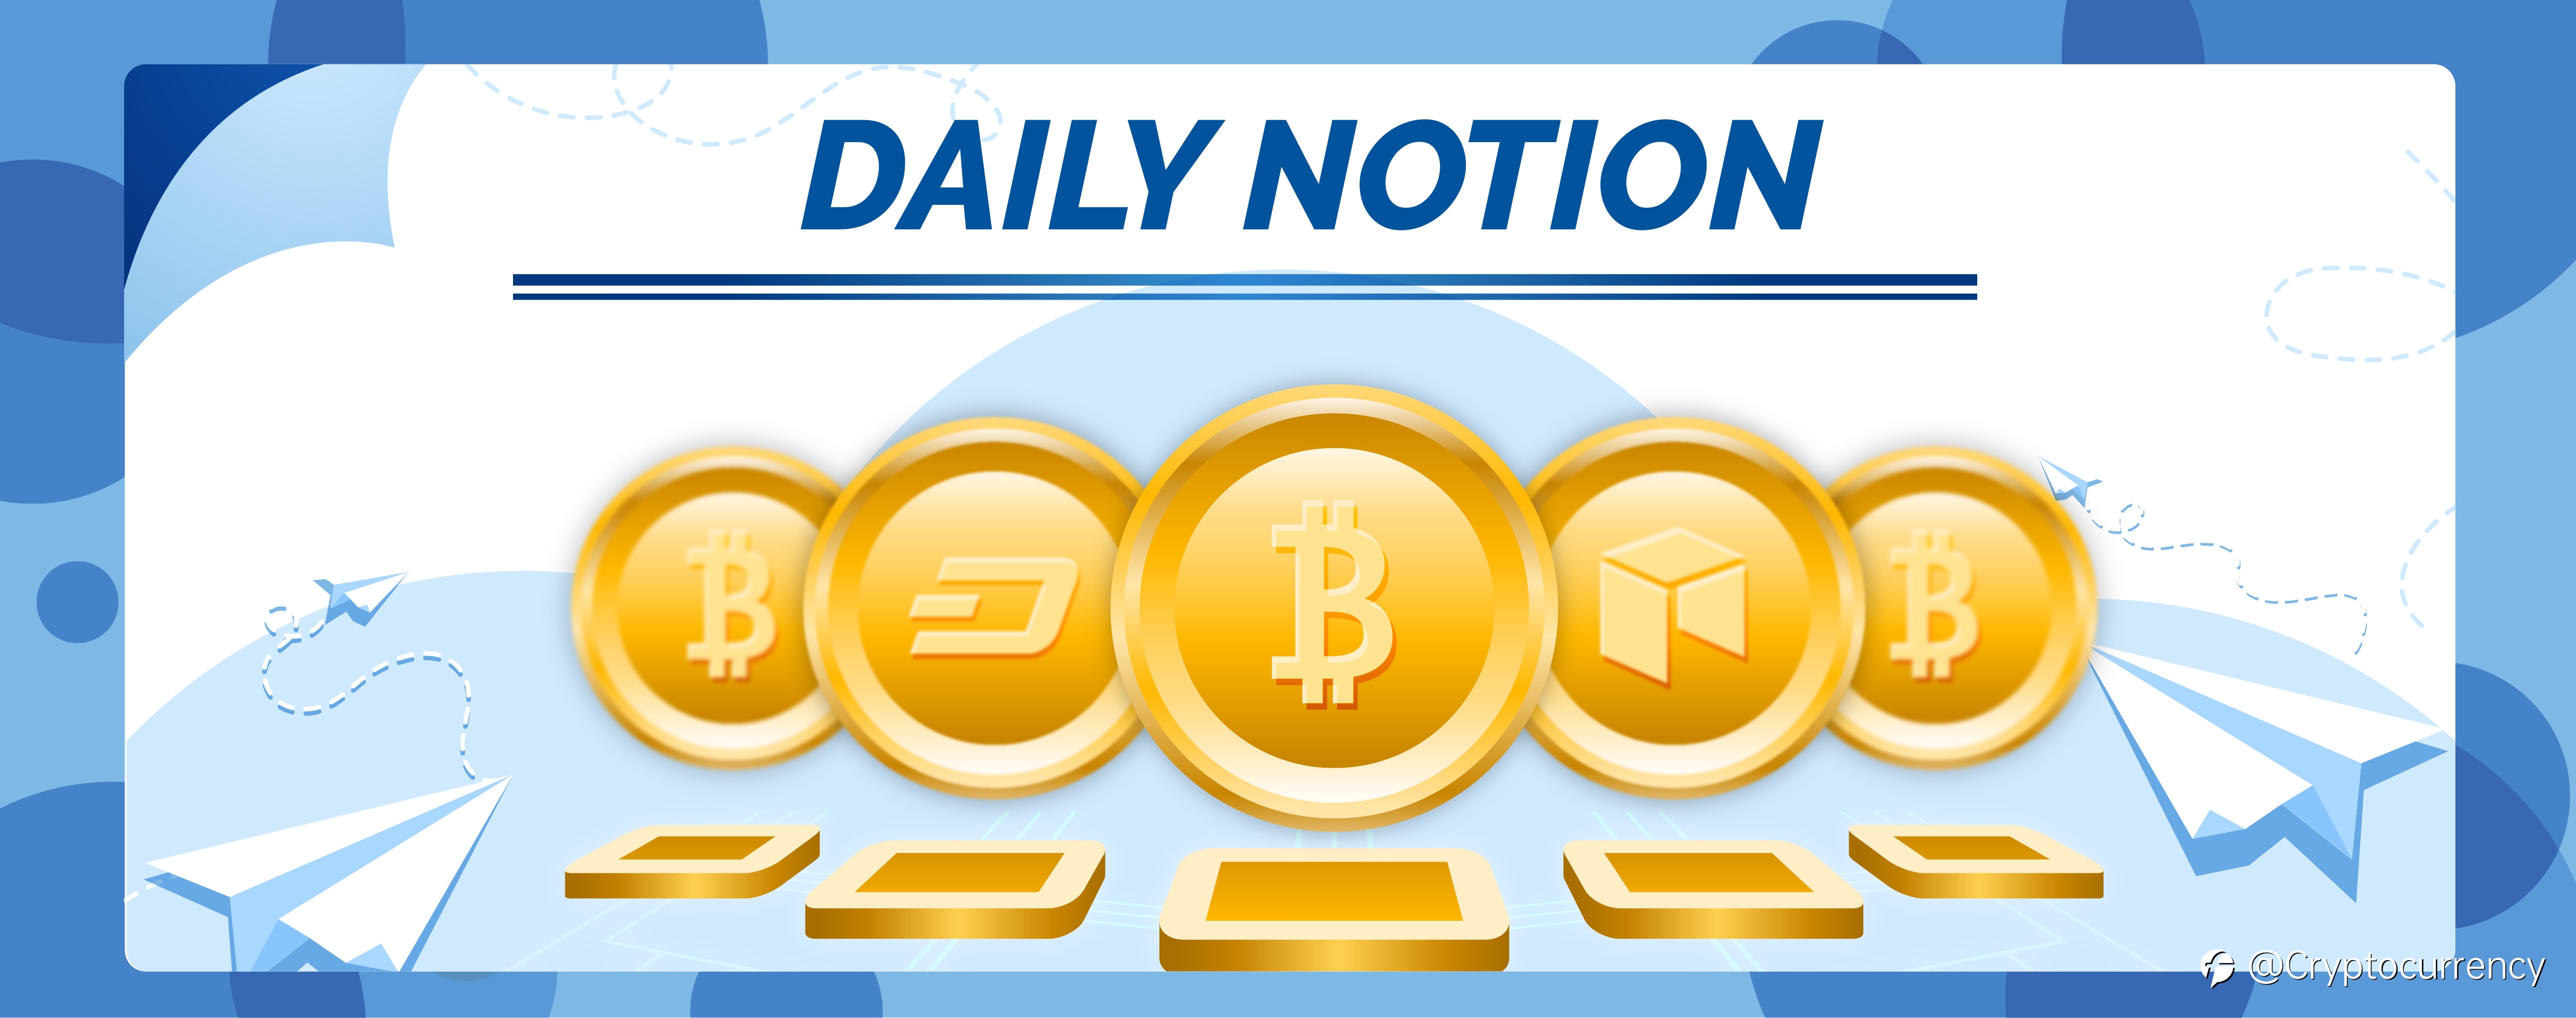 (DAILY NOTION): BTC/USD: Bulls Are Nowhere to Be Seen as The Price Nosedives Further